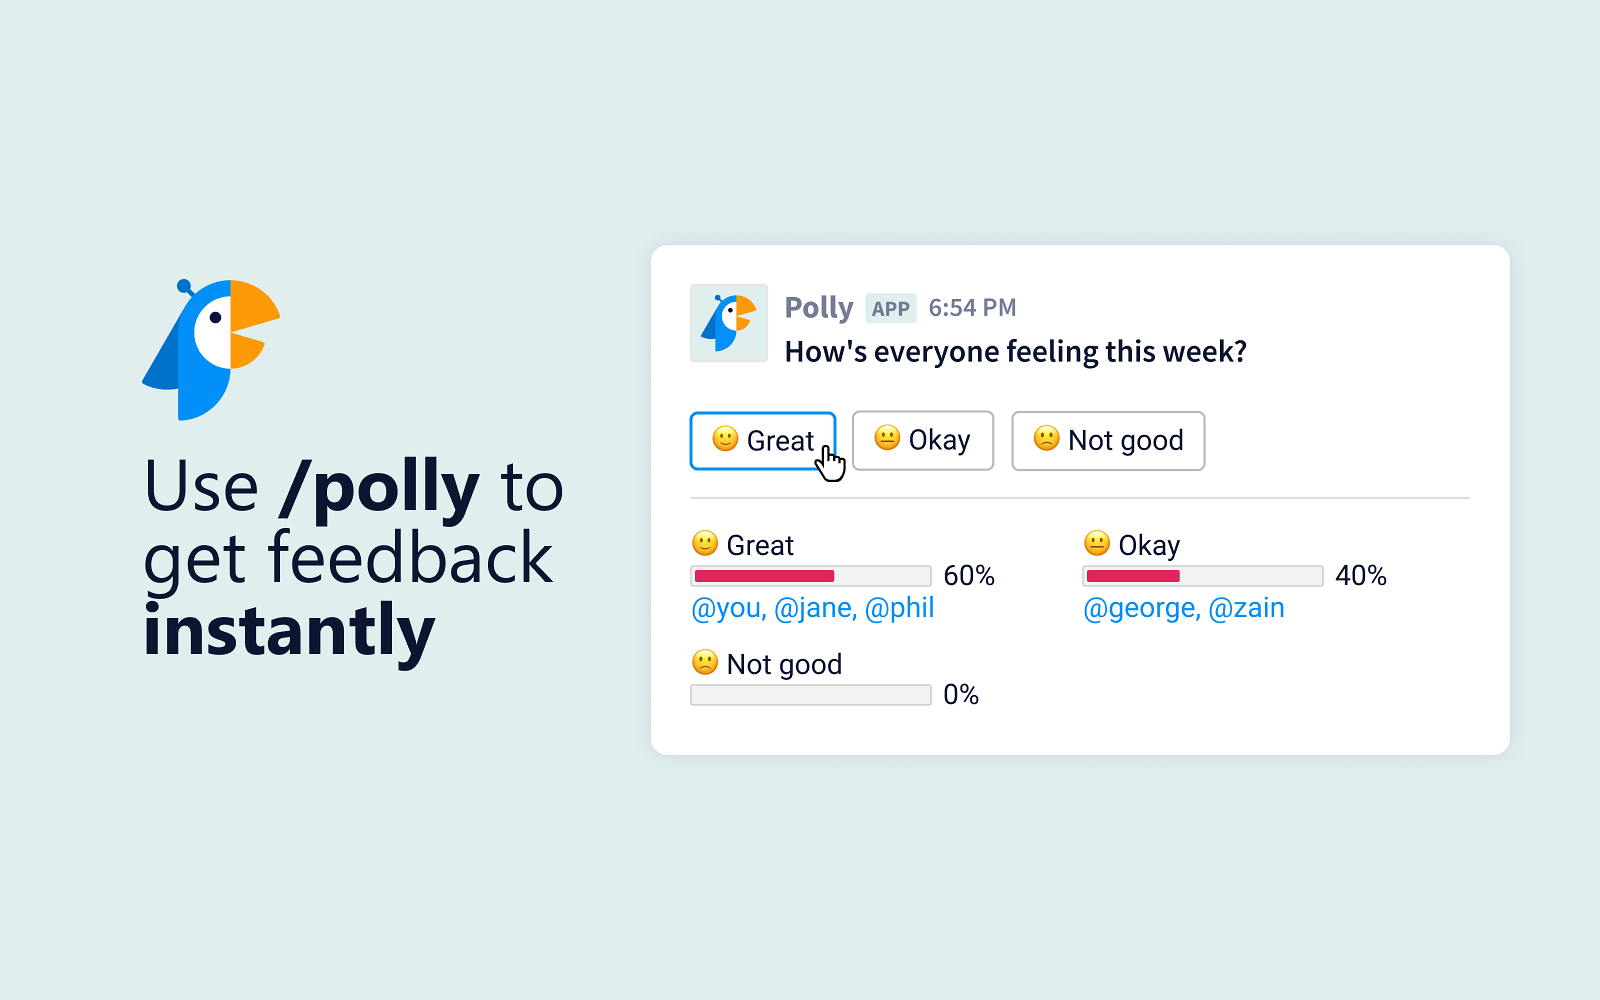 Use Polly in Slack, MS Teams, and Zoom to easily get feedback from your audience using a variety of advanced question types like multiple choice, ranking, emoji scale, and more.